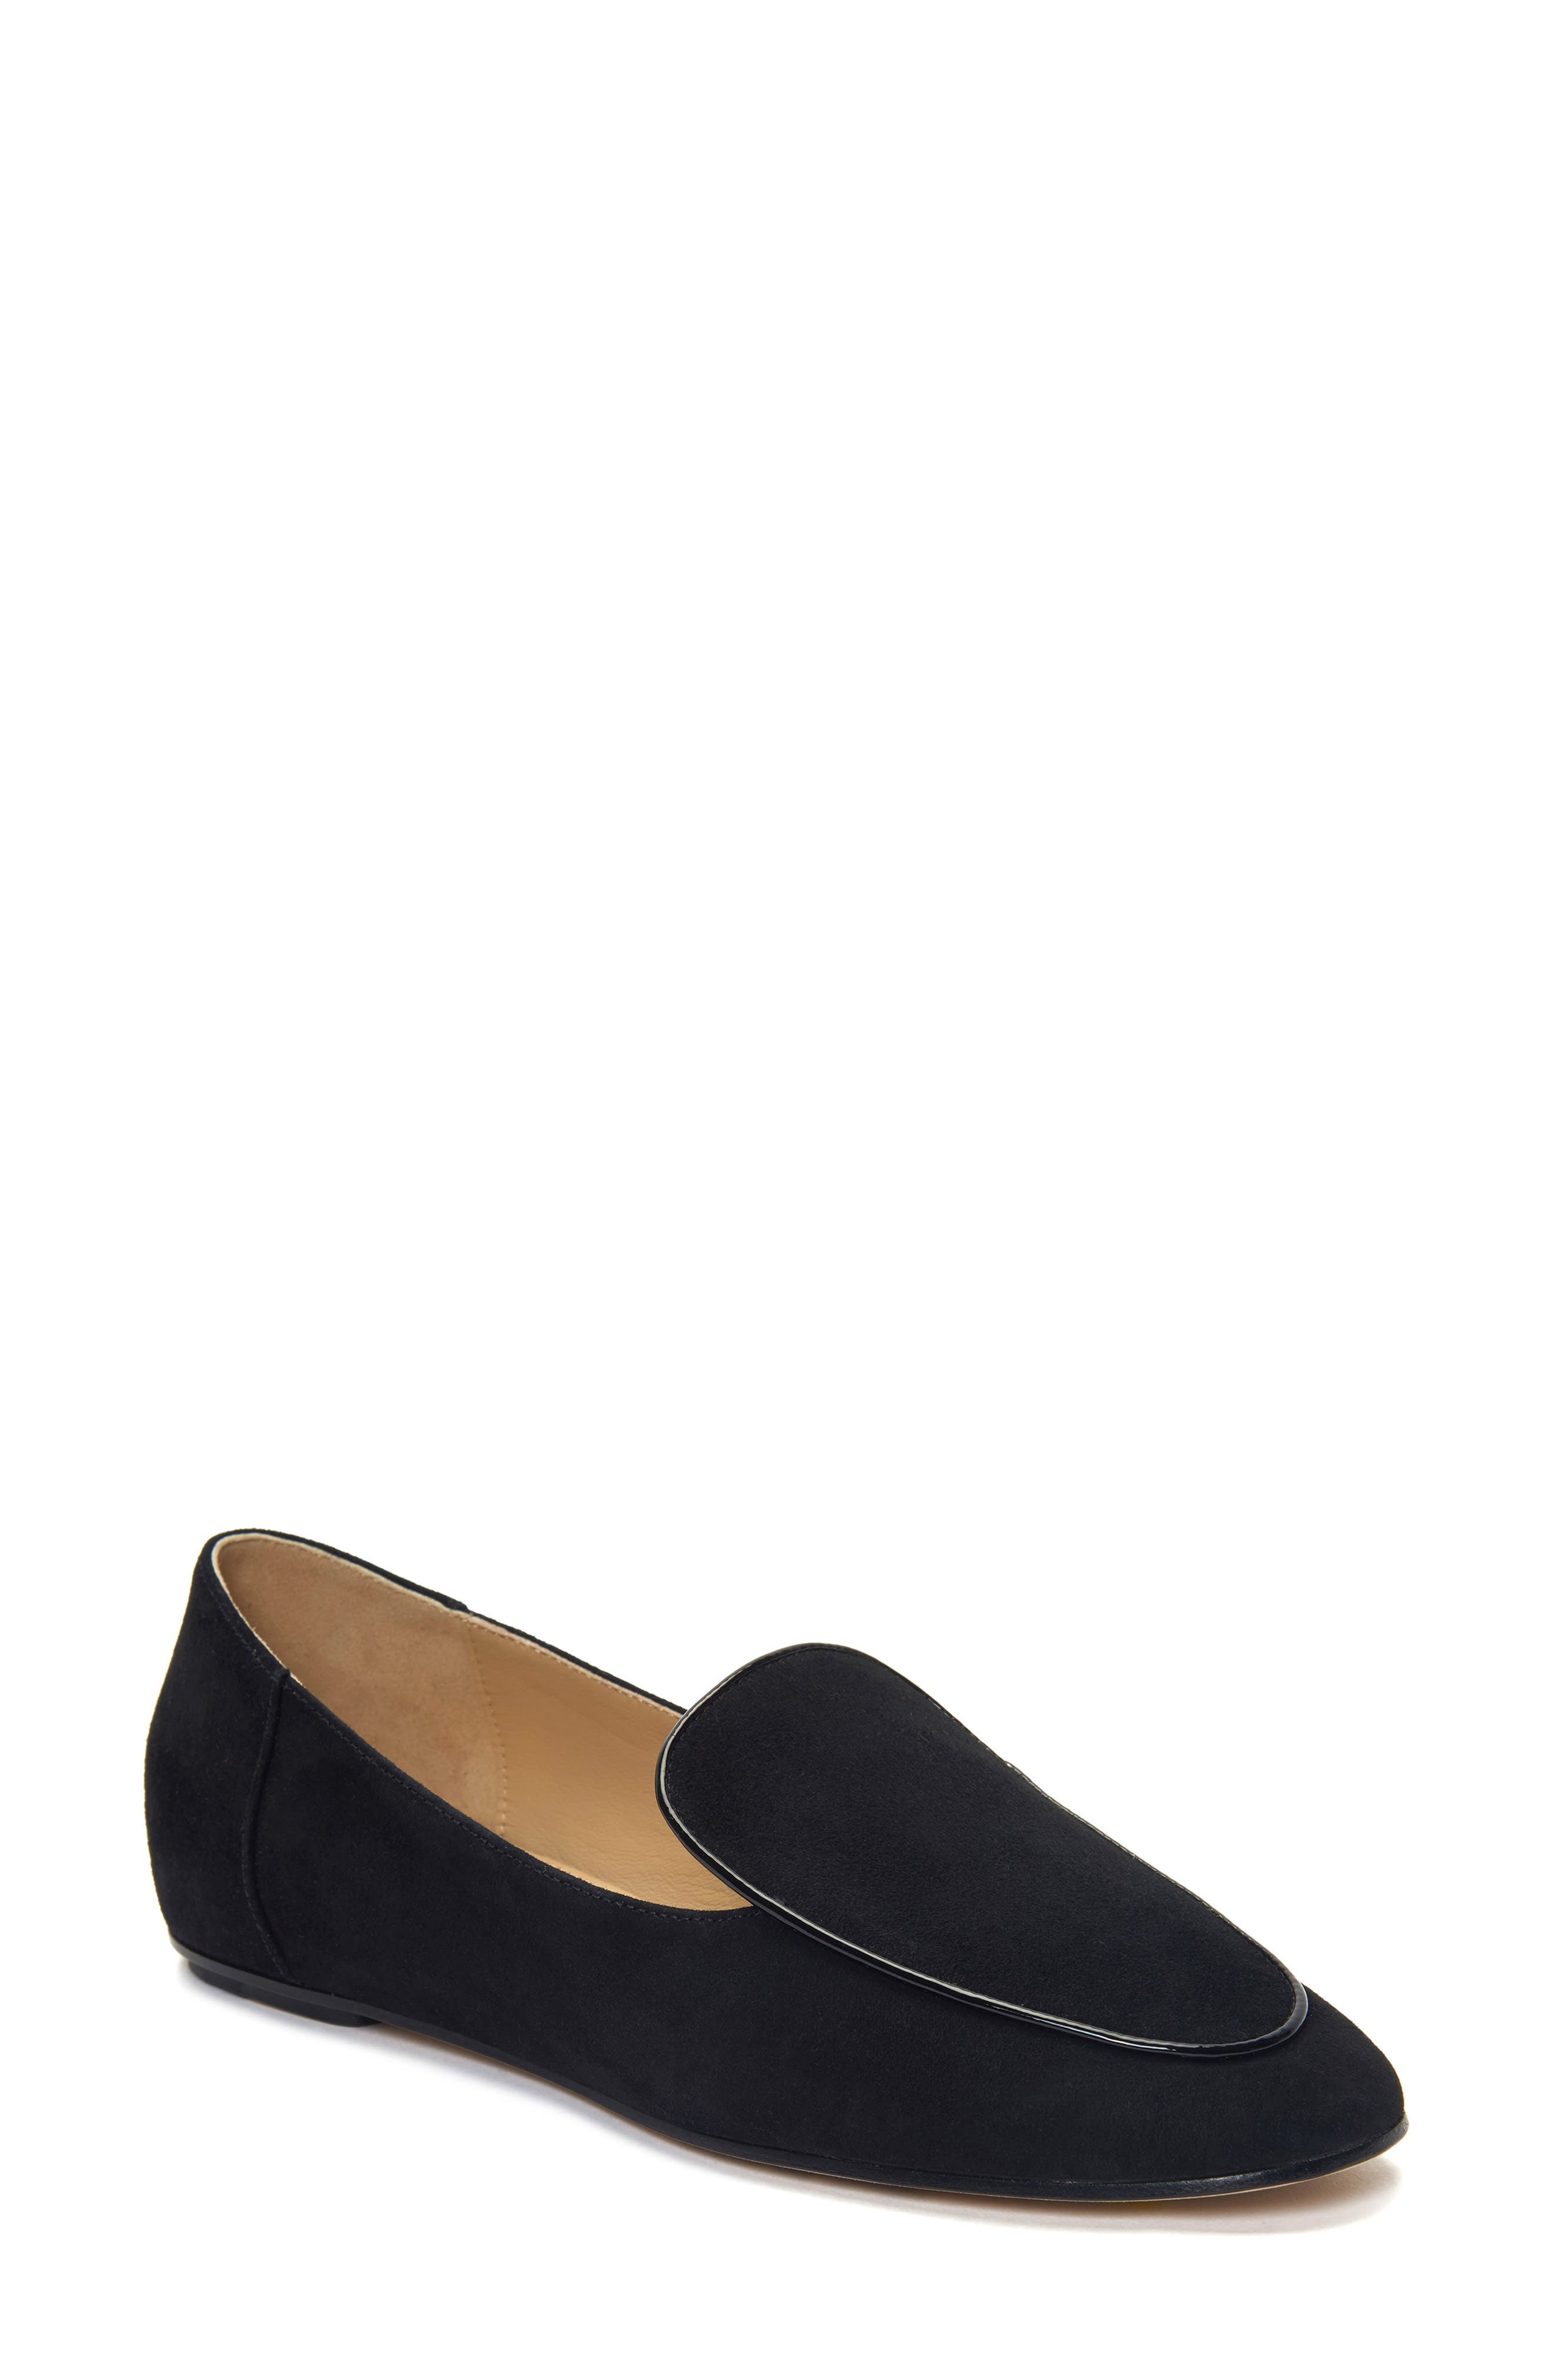 etienne aigner loafers